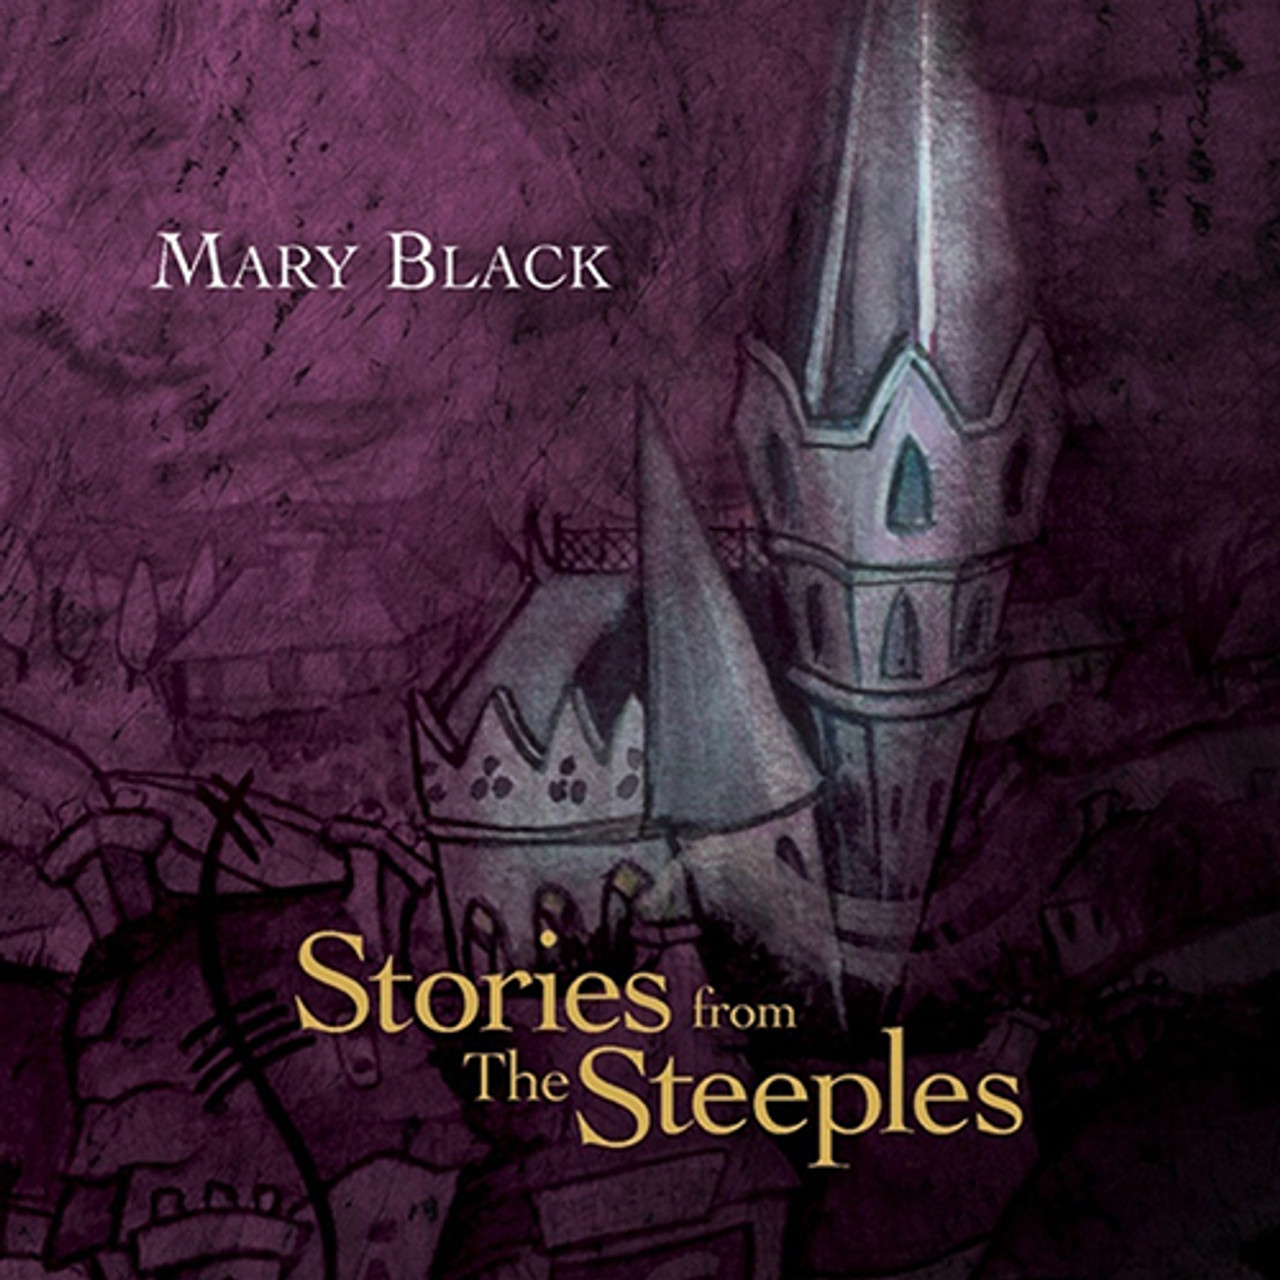 Mary Black - Story of the Steeples (180g Import Vinyl - Music Direct